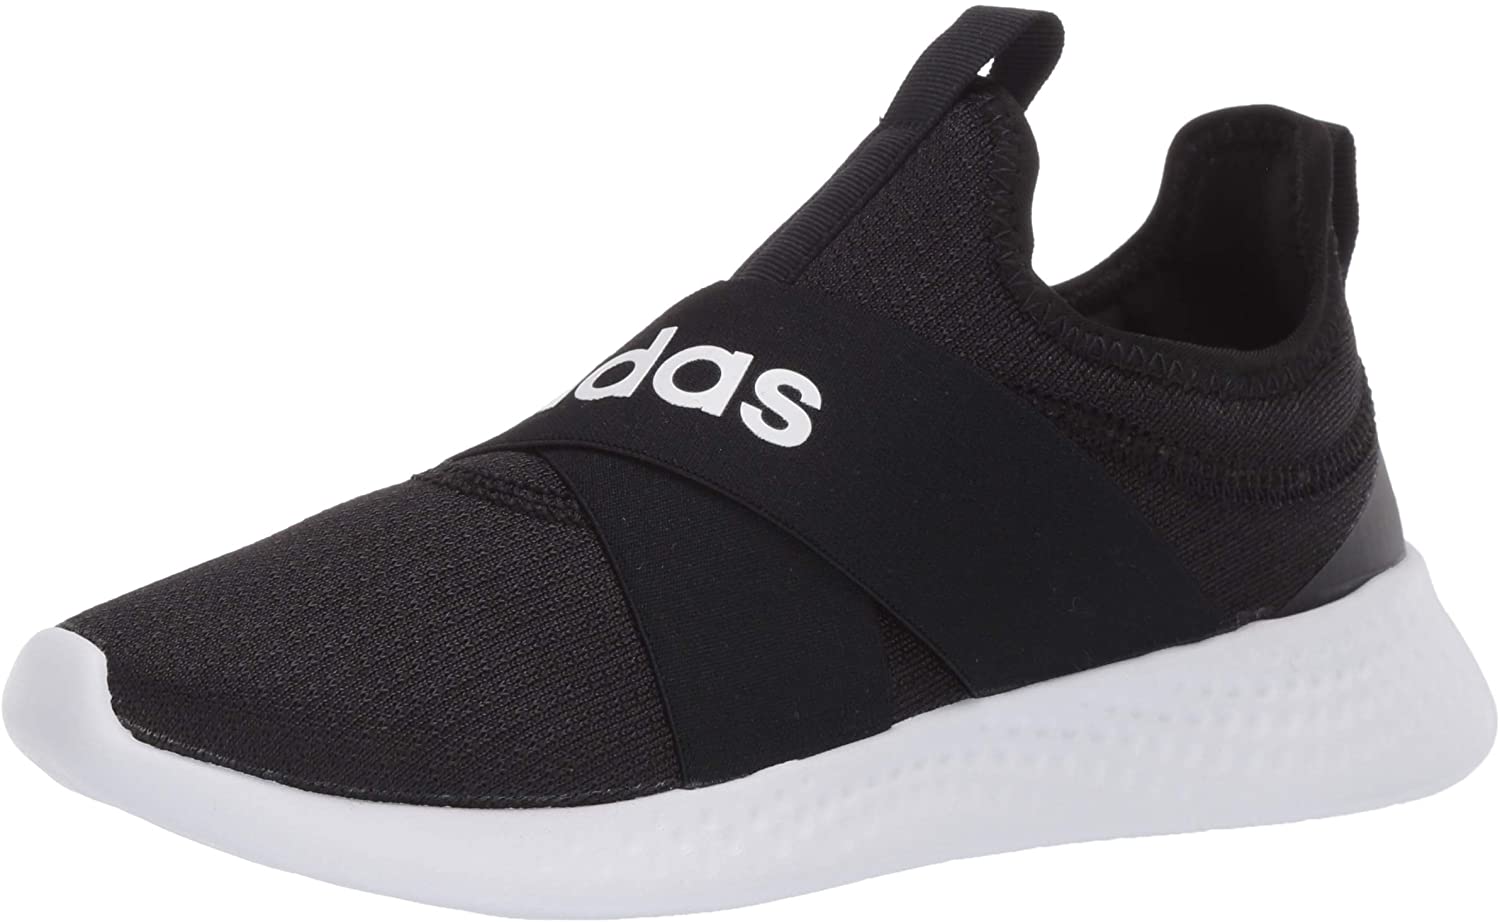 adidas Womens Puremotion Adapt Running Shoes - Core Black / Cloud White / Grey Five - 7.5